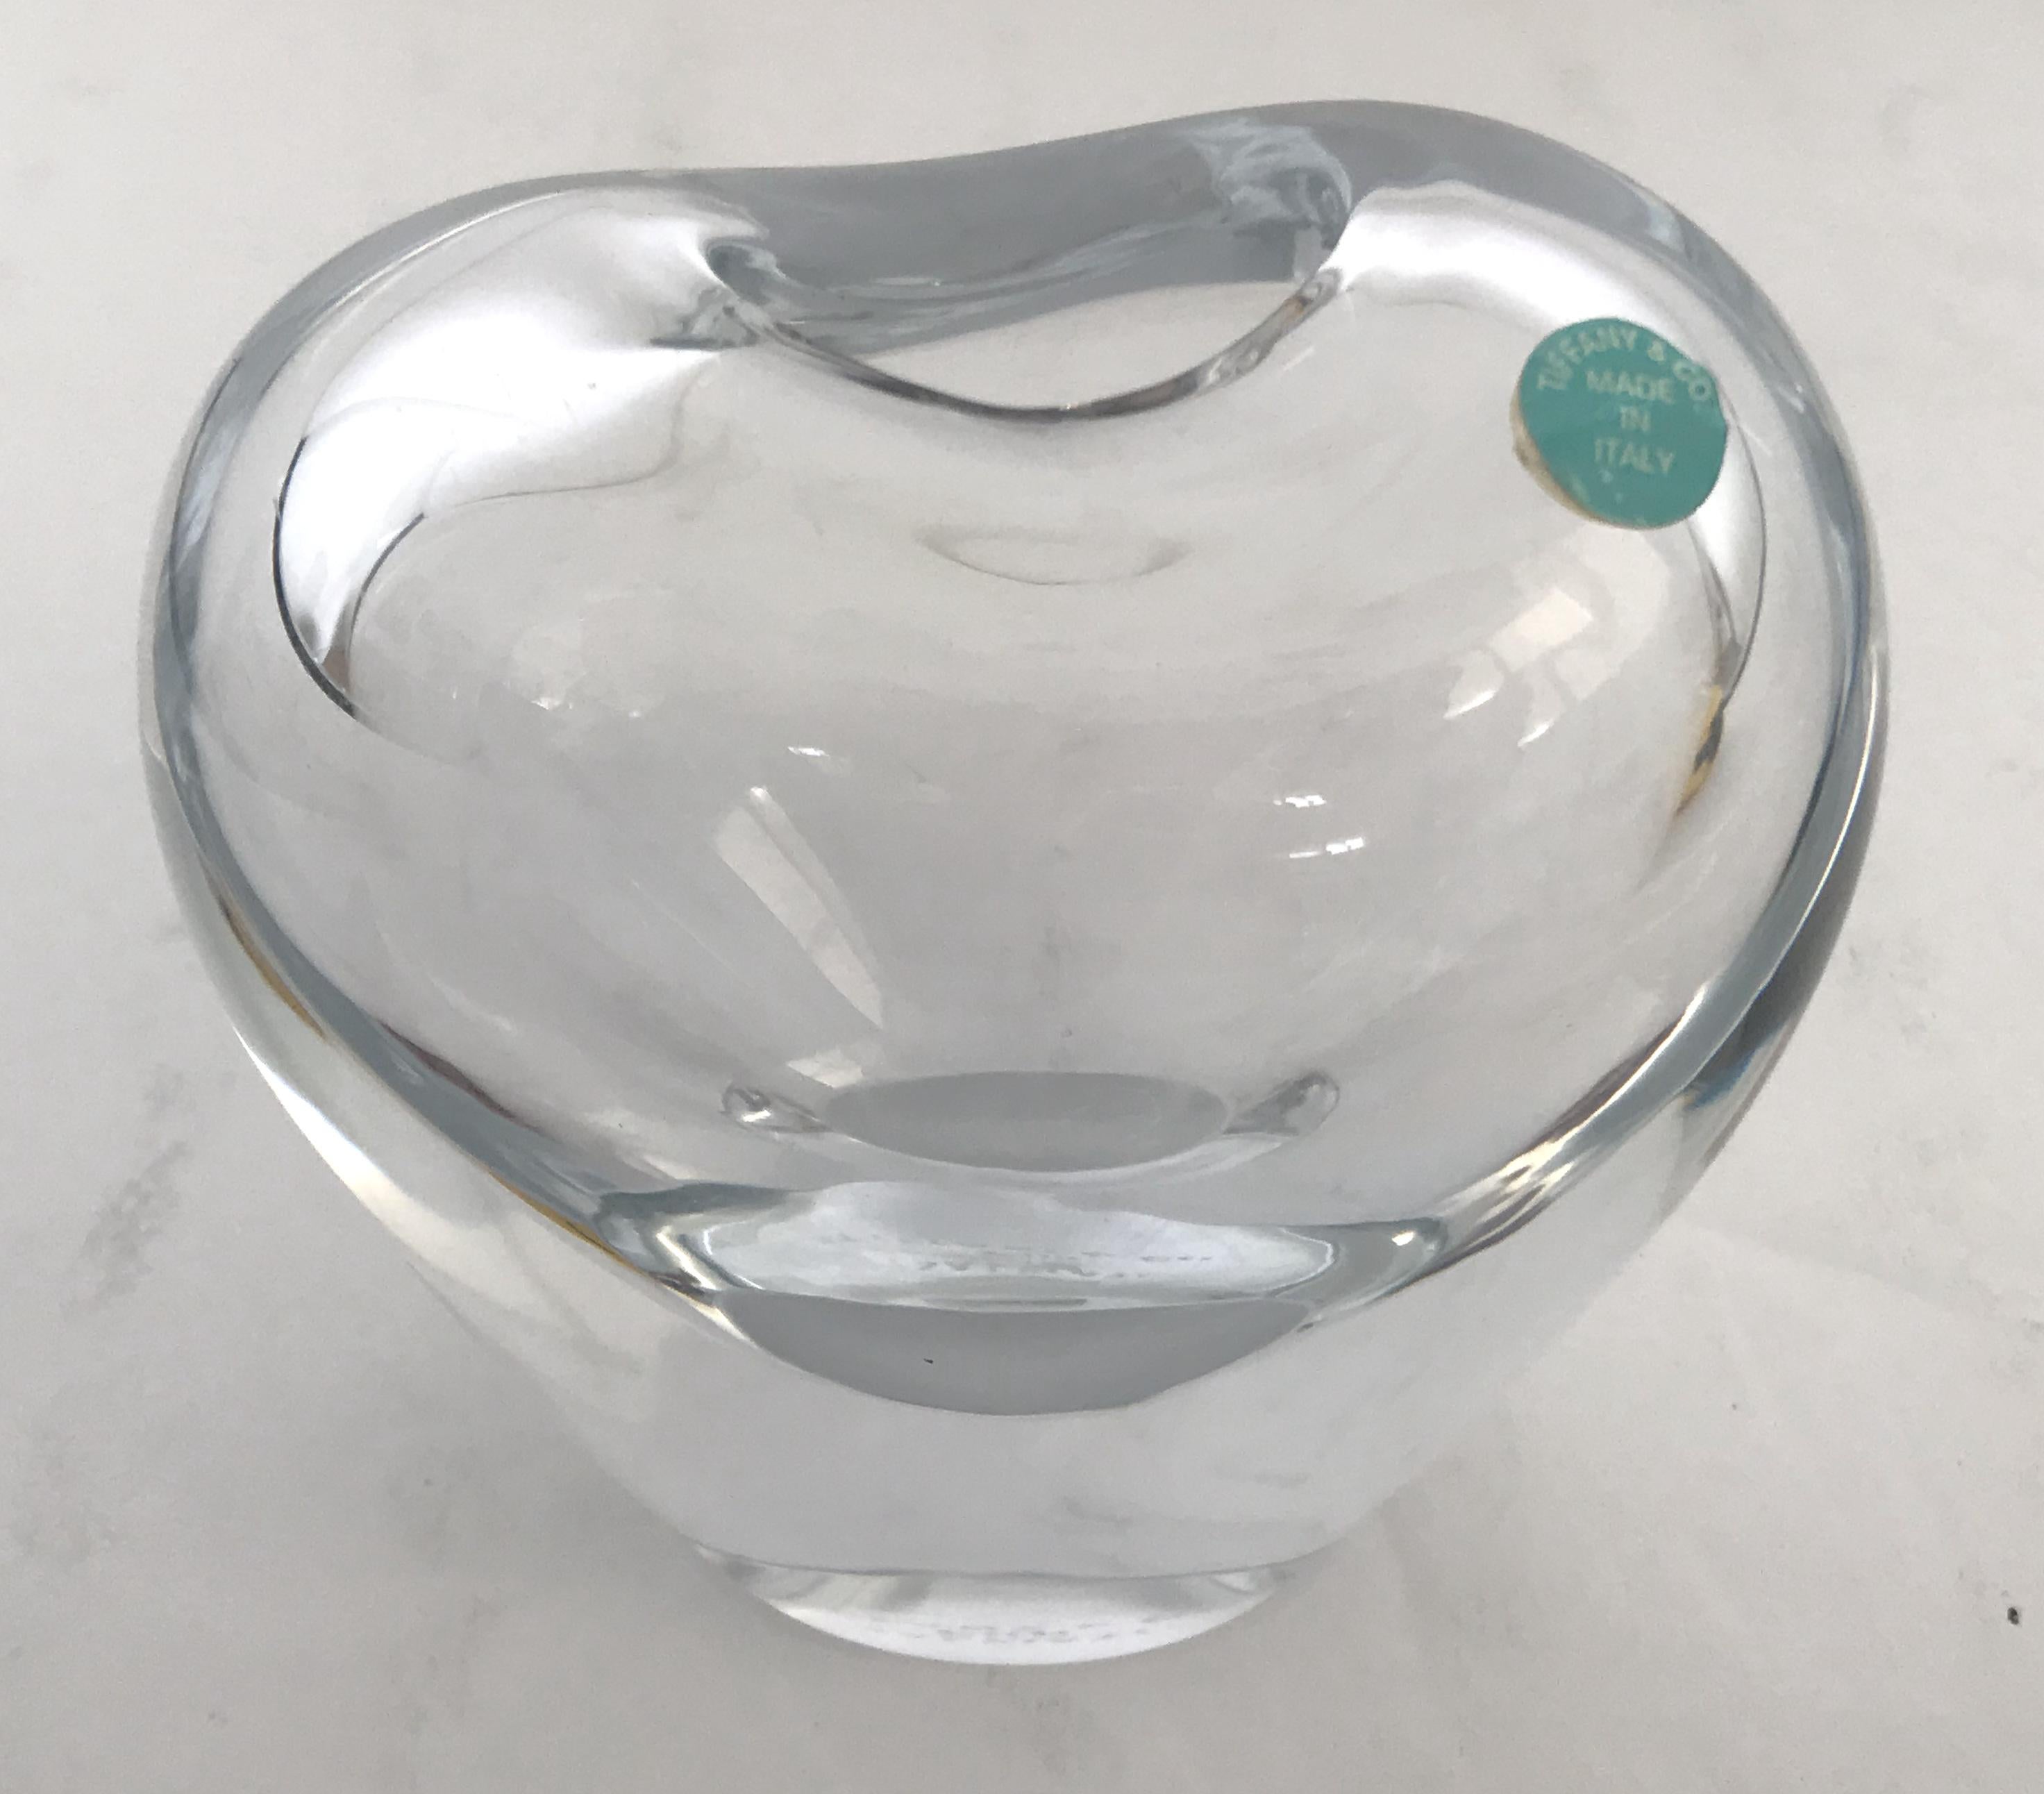 Lovely heart shaped hand blown clear Murano glass vase, made in Italy by Salviati for Tiffany & Co, circa 1980
Original sticker on the vase, and original mark etched at the base
Measures: height 4 inches, width 4 inches, depth 3 inches
1 in stock in